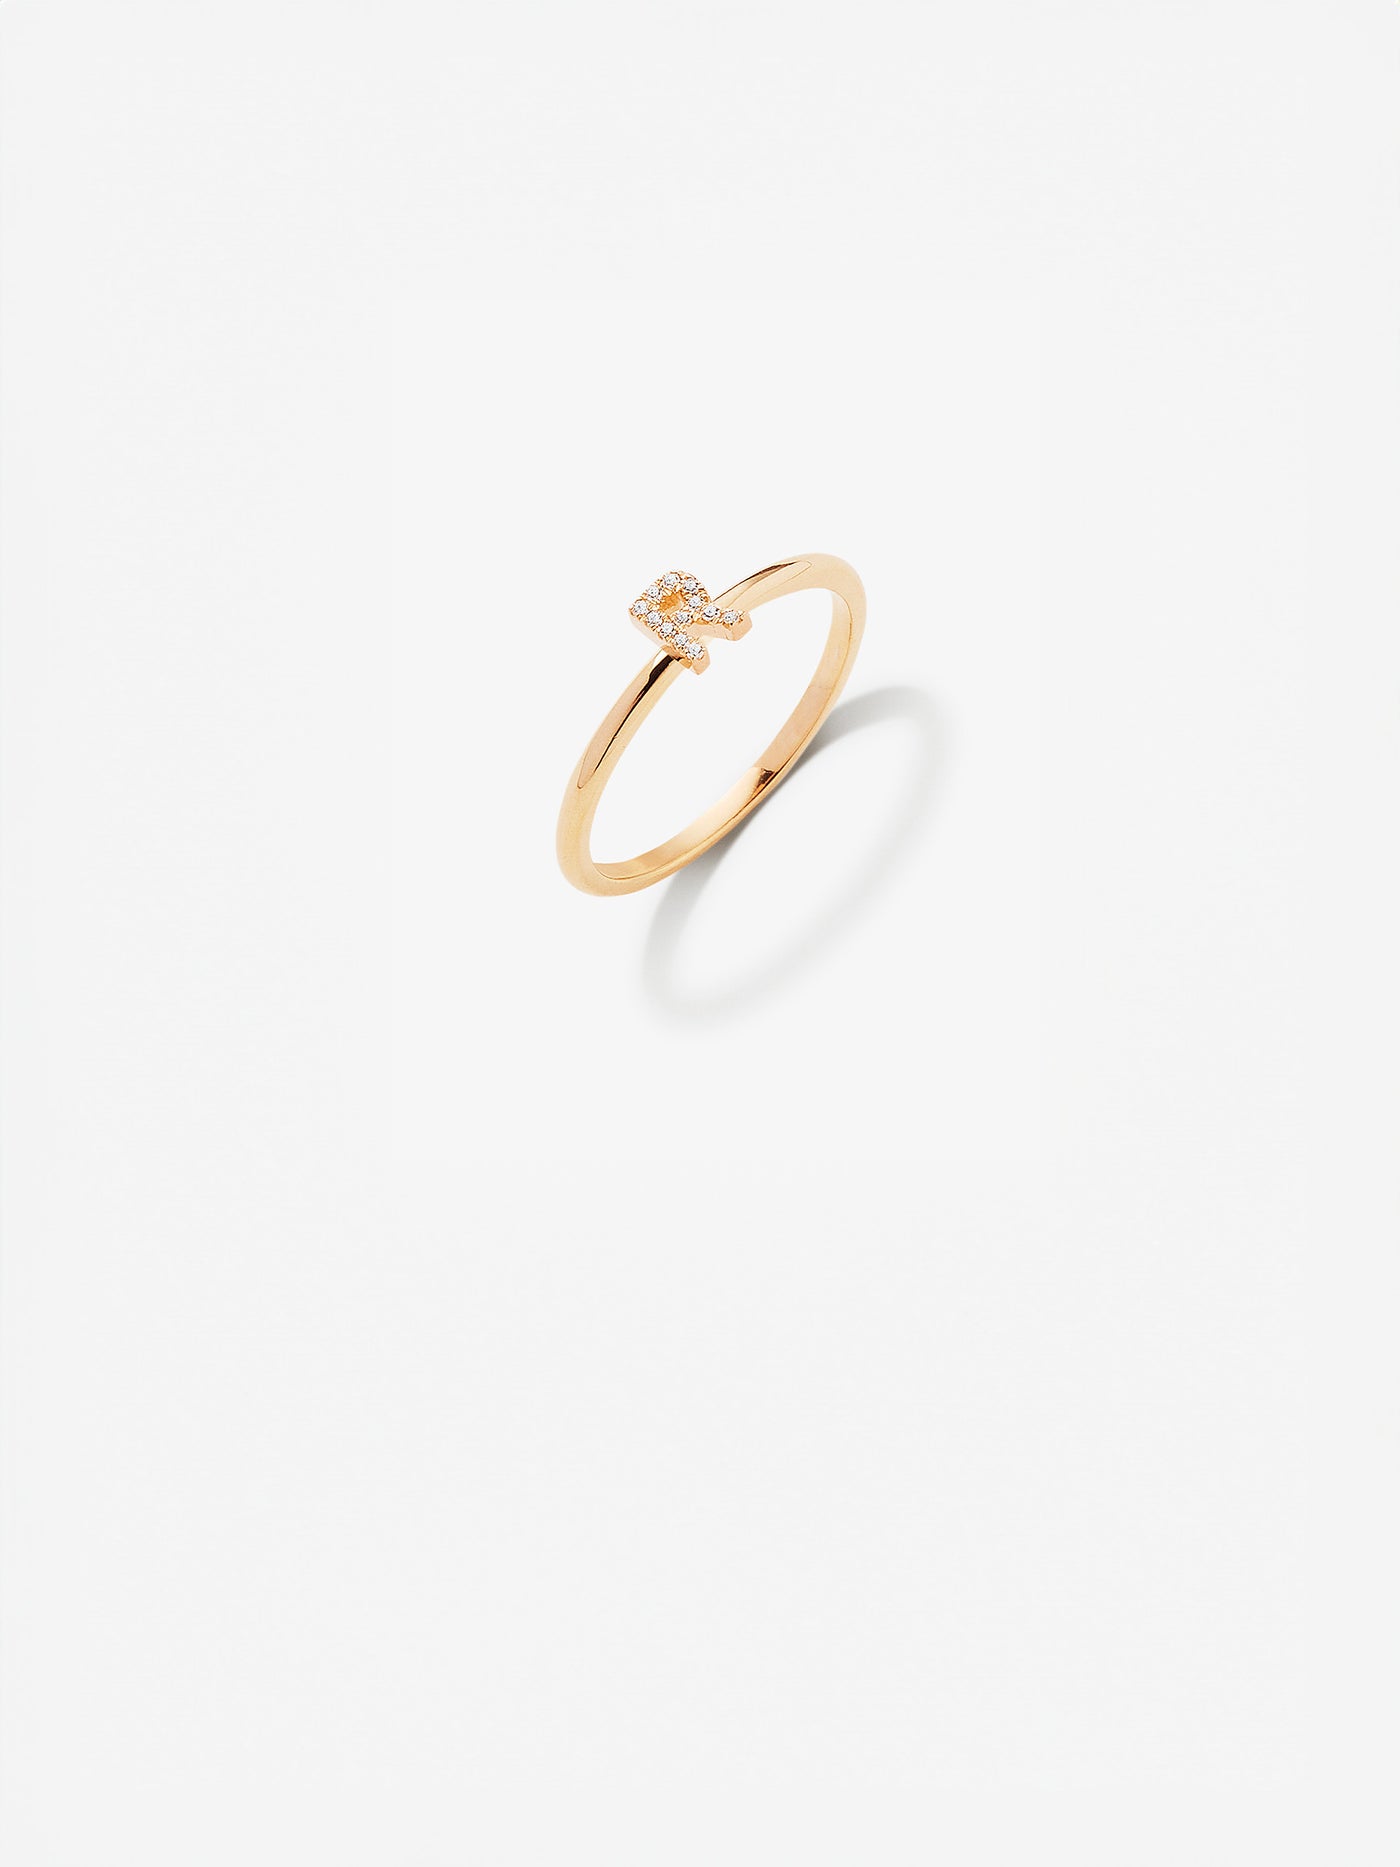 Letter R Ring in Diamonds and 18k Gold